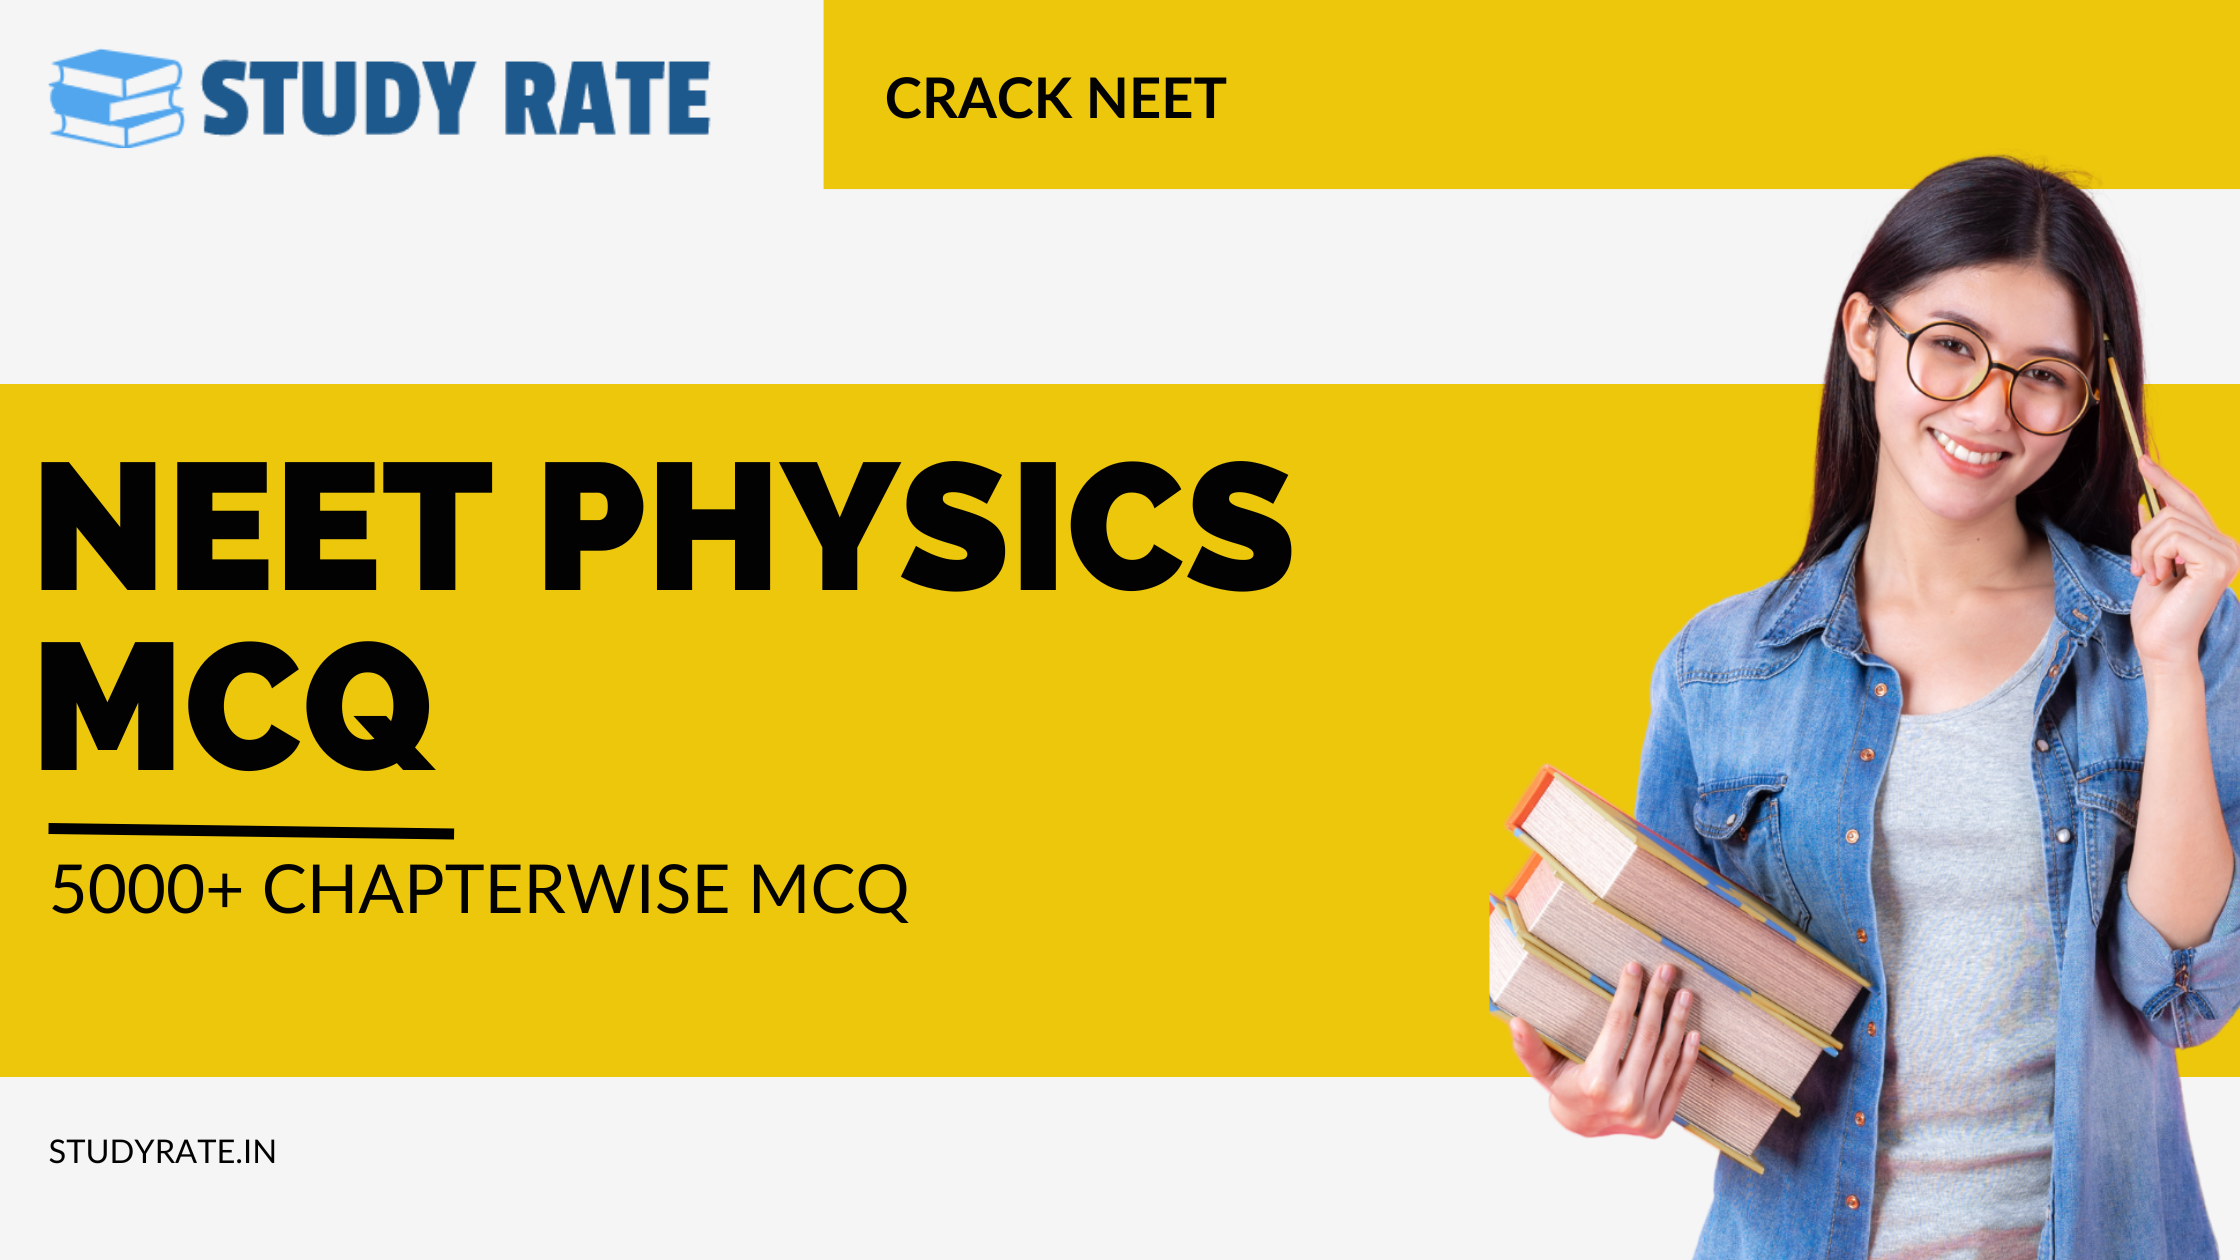 You are currently viewing NEET Physics MCQ: 5000+ Chapterwise Physics MCQ Practice Questions with Solutions